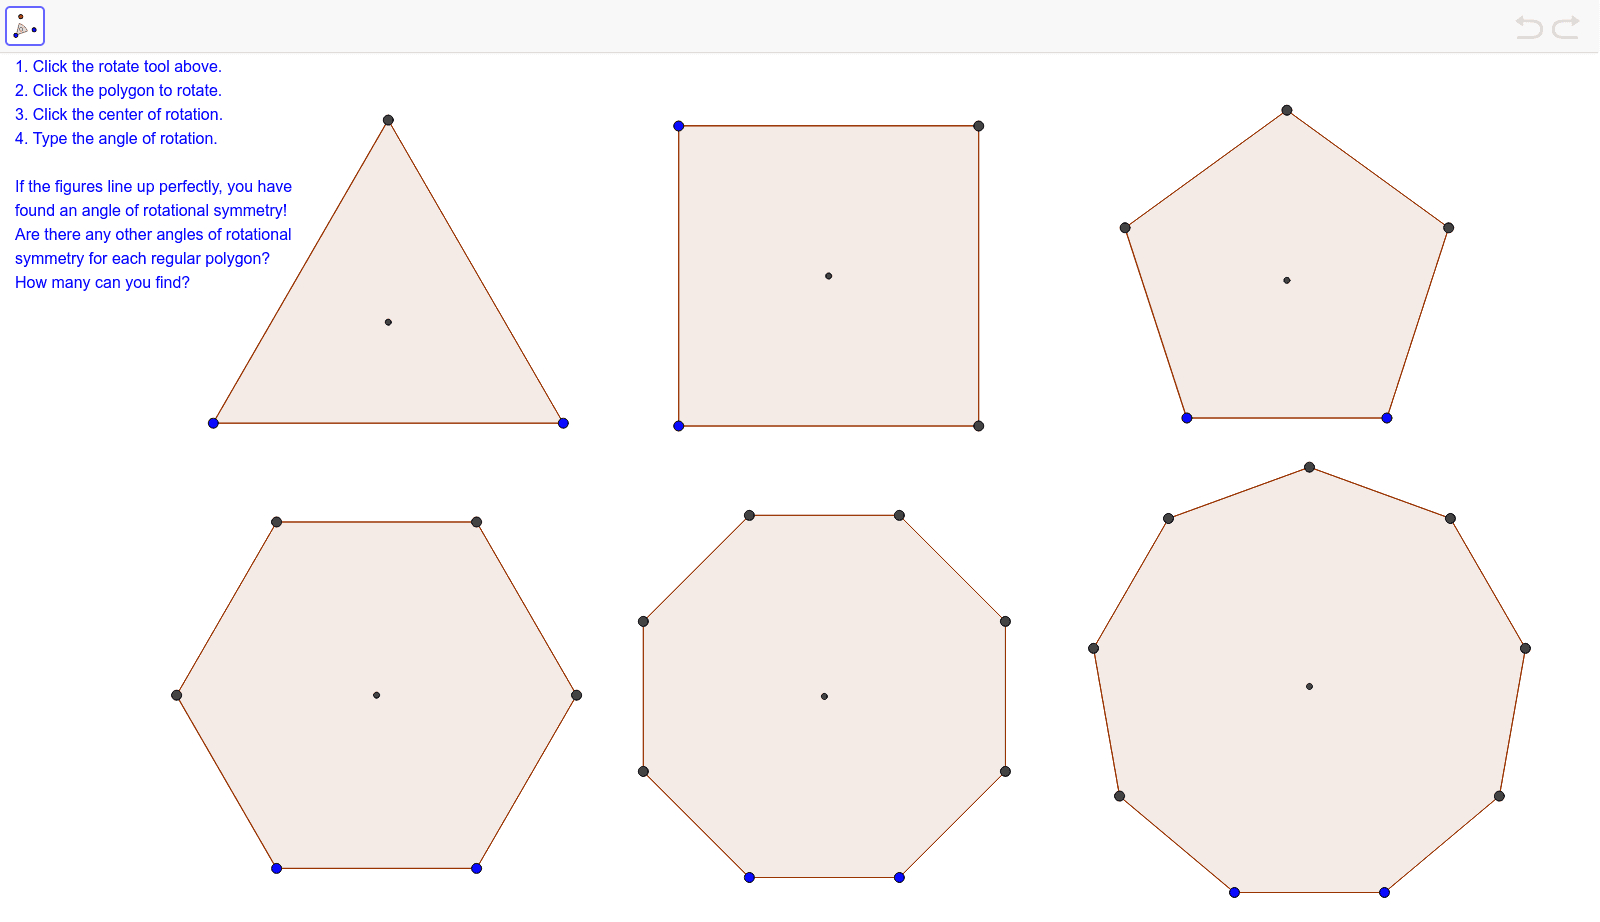 Find the smallest angle that rotates each regular polygon onto itself.  Press Enter to start activity